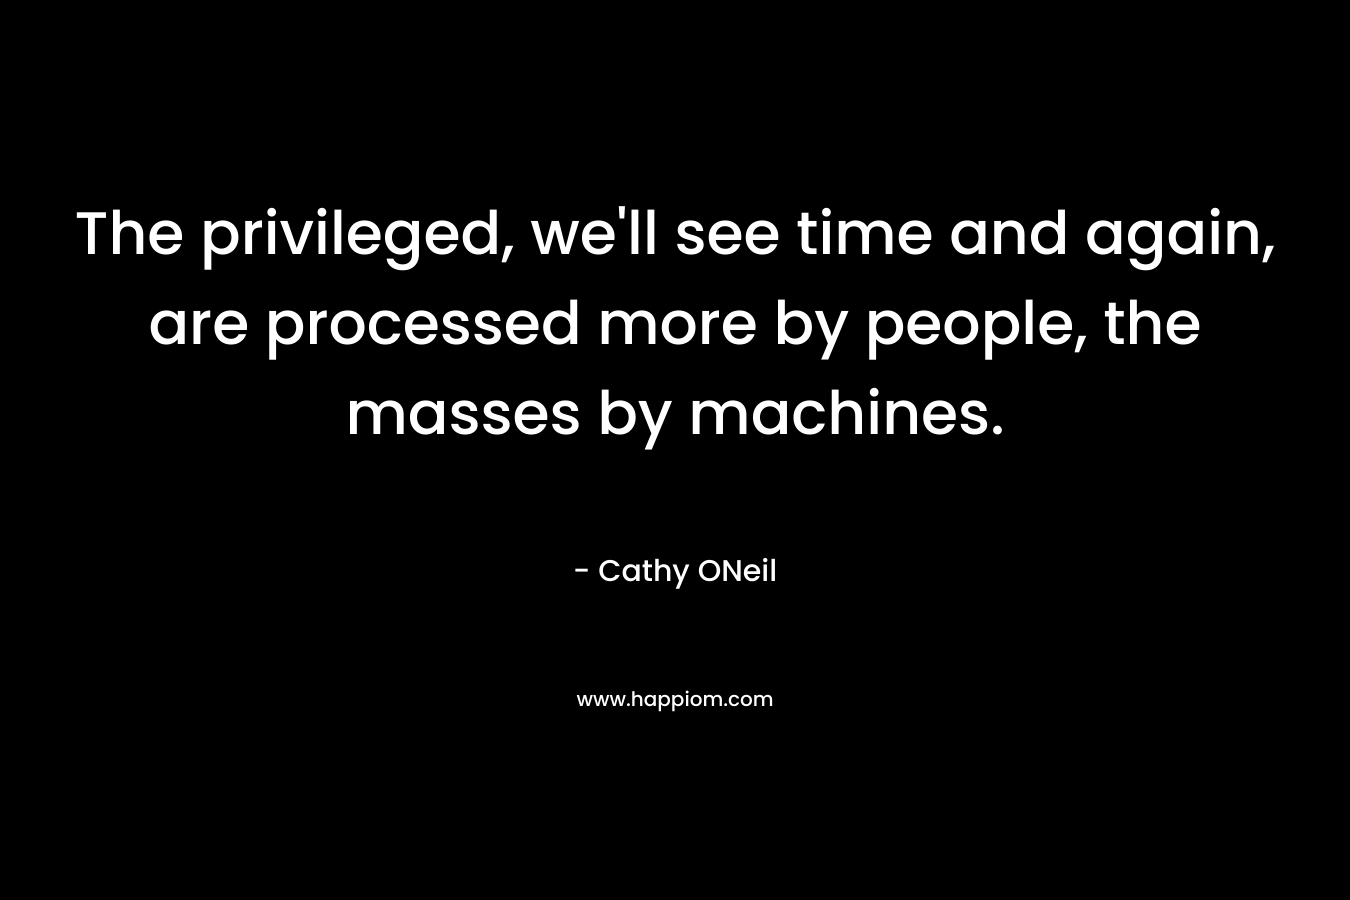 The privileged, we’ll see time and again, are processed more by people, the masses by machines. – Cathy ONeil